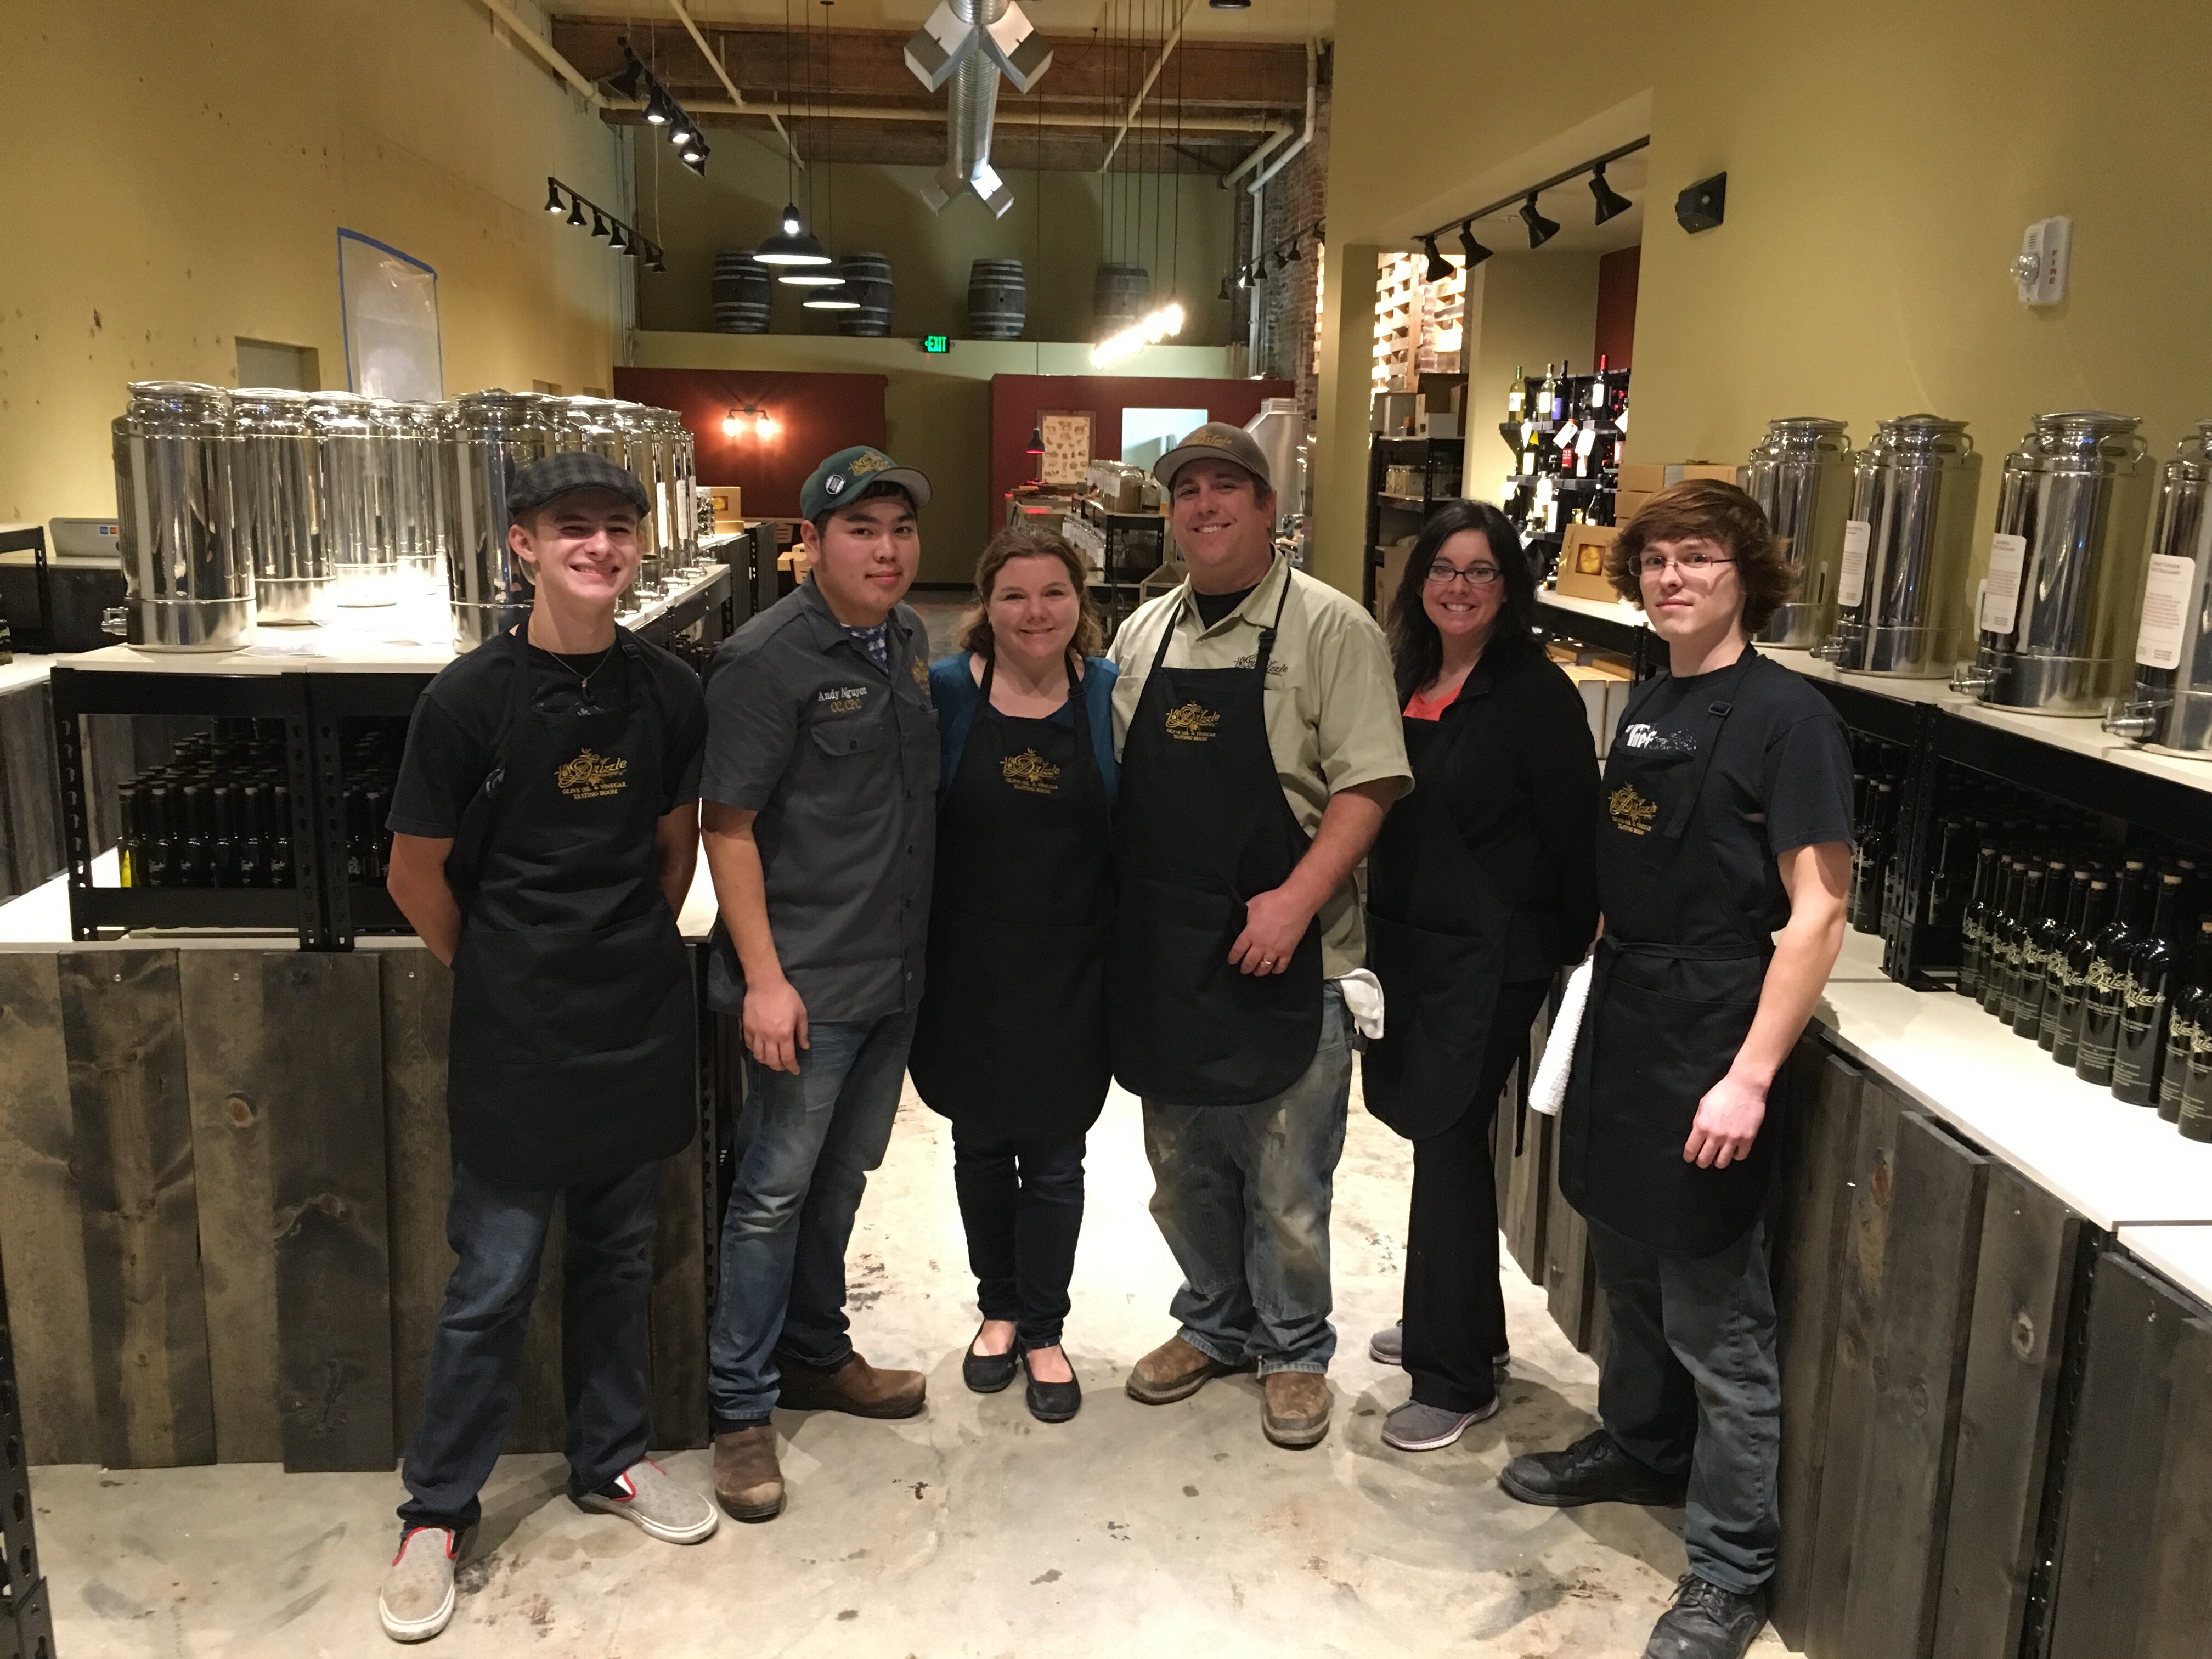 After a long few days of making final preparations for opening, the Drizzle Lynden team took a moment for team photo.